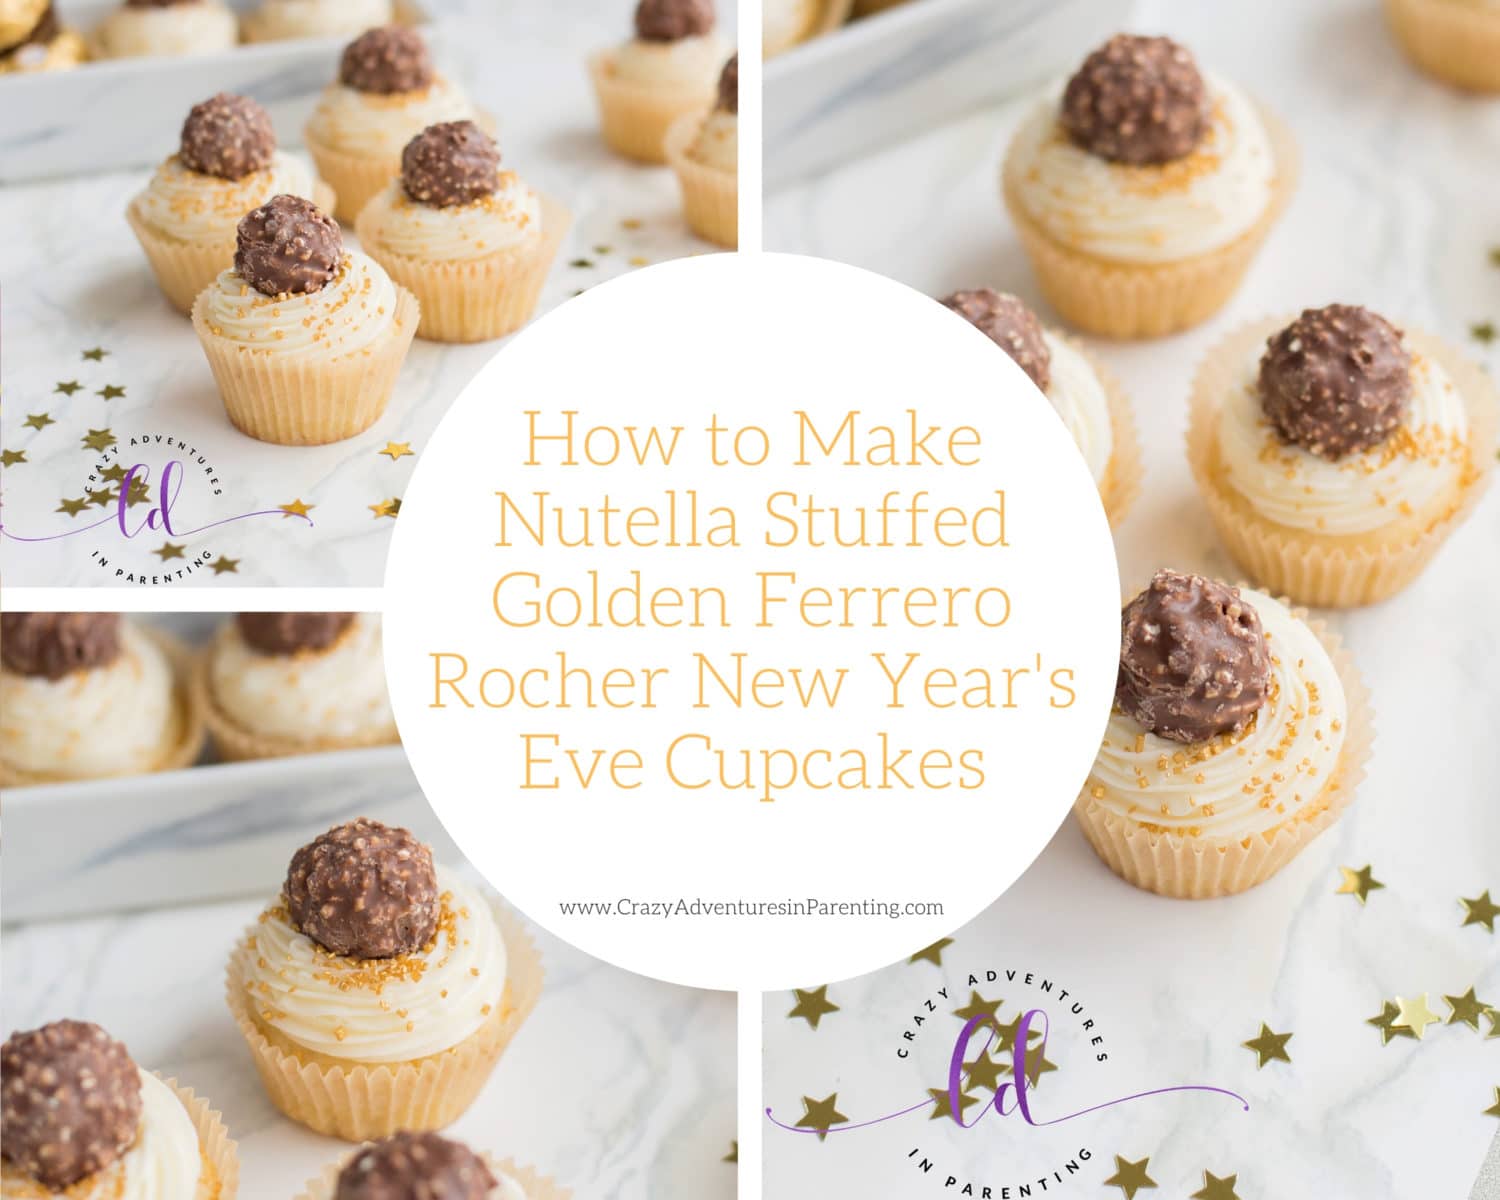 How to Make Nutella Stuffed Golden Ferrero Rocher New Year's Eve Cupcakes